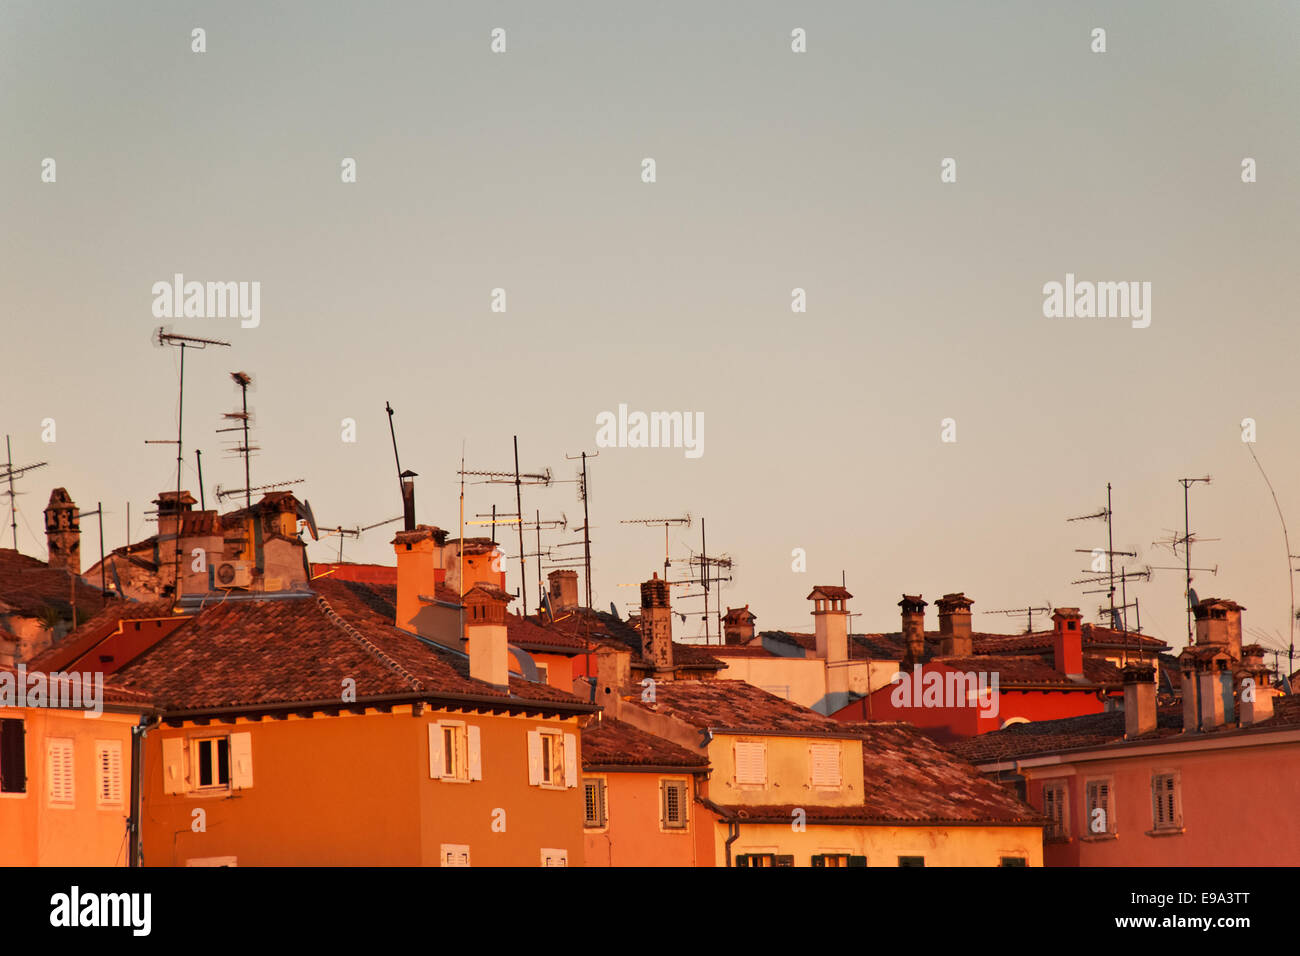 Rooftops with antennas Stock Photo